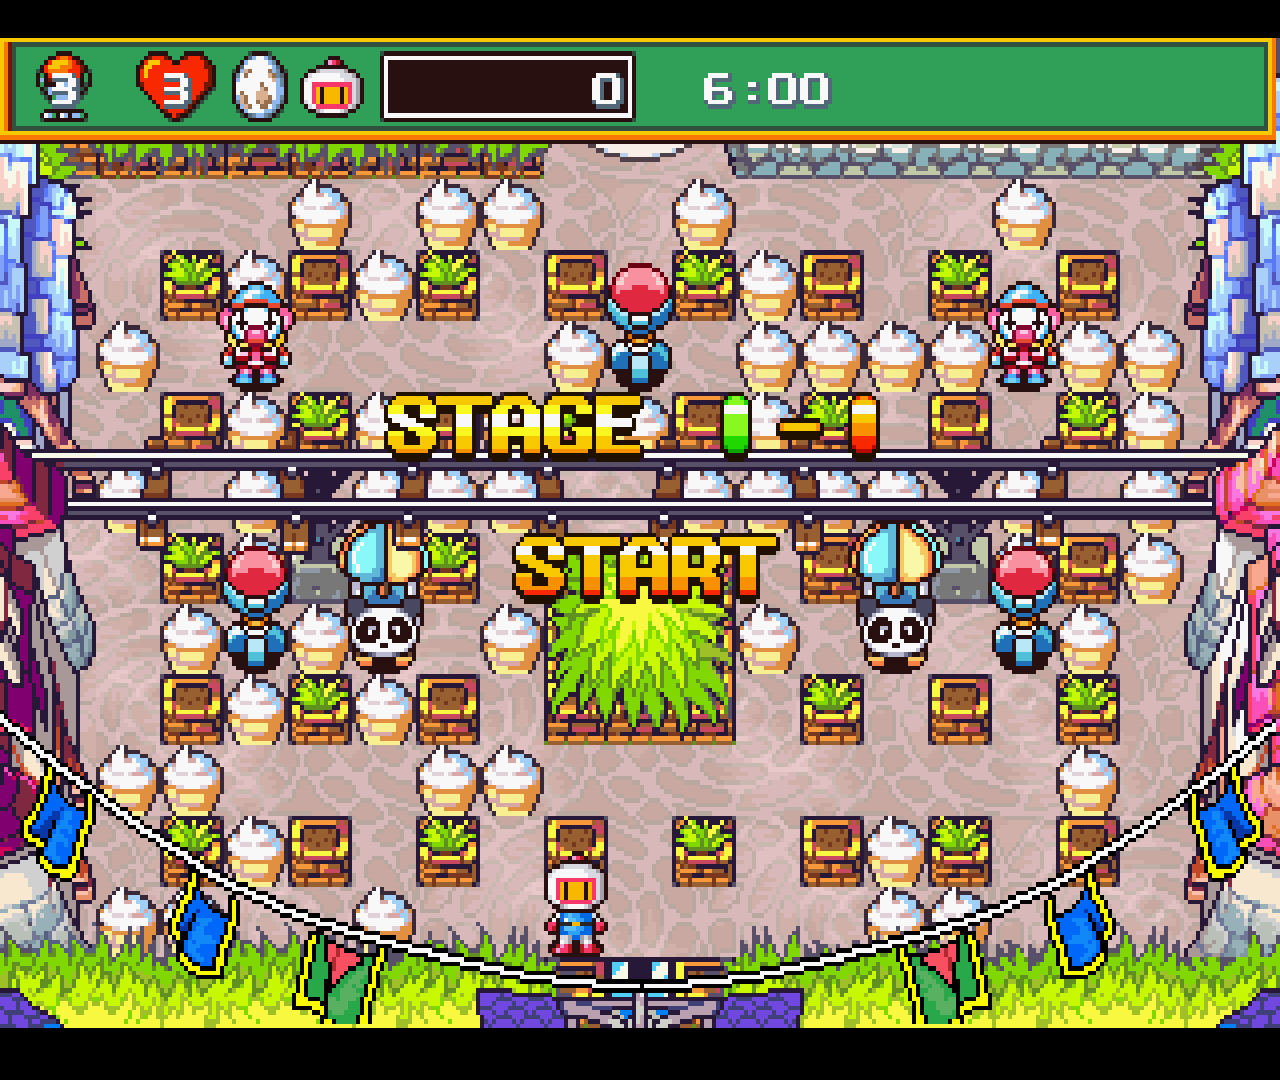 Linux-Gaming-Figure-05-Cute-Animations-bright-color-very-good-gameplay-it-won%E2%80%99t-get-any-better-than-that-when-it-comes-to-Bomberman.png